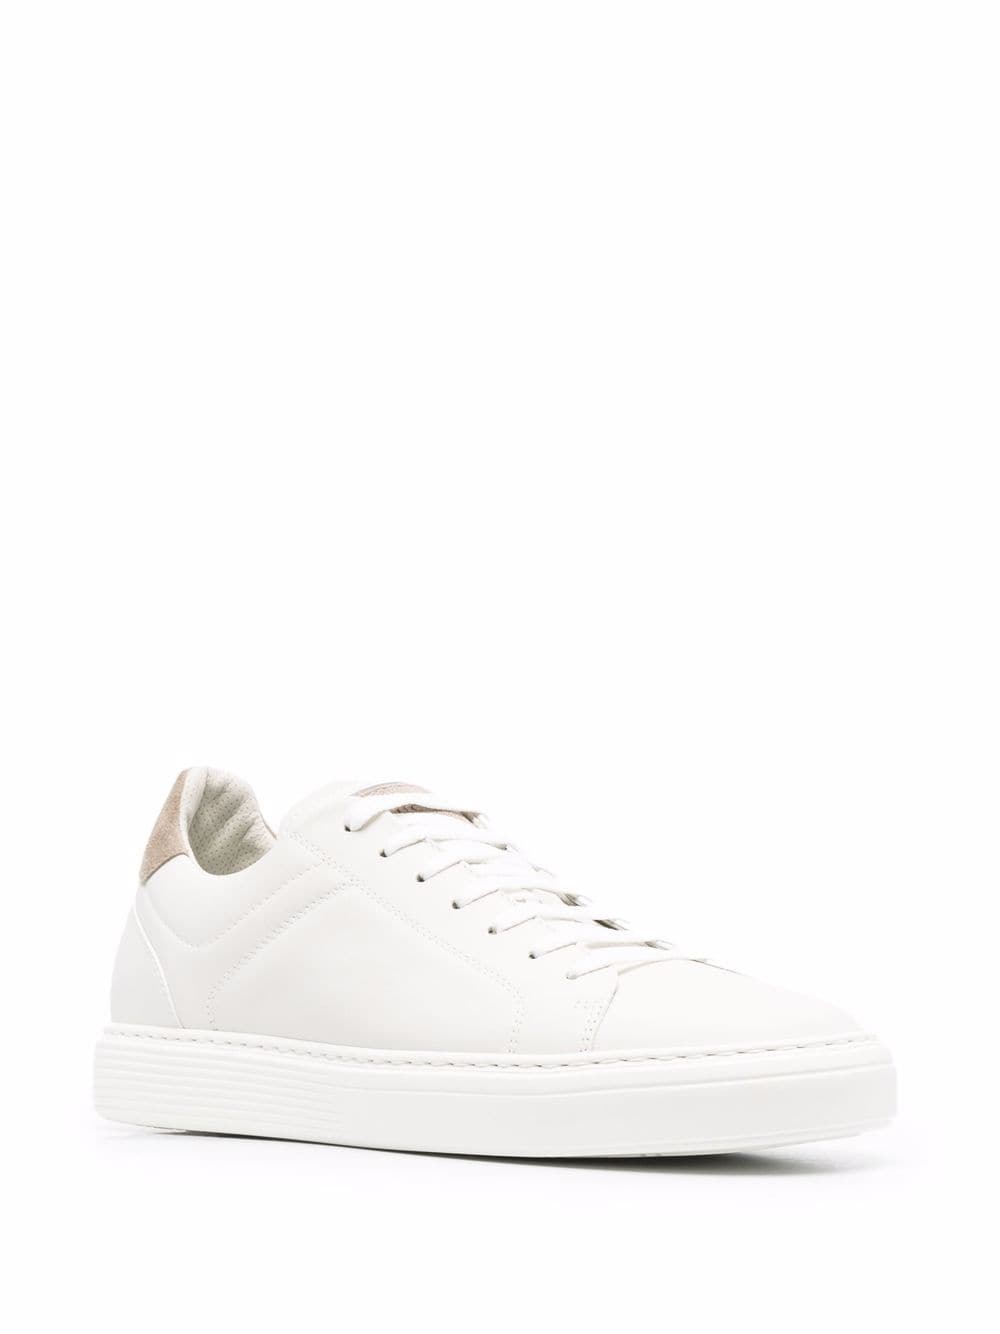 Brunello Cucinelli Low-top Leather Sneakers In White | ModeSens